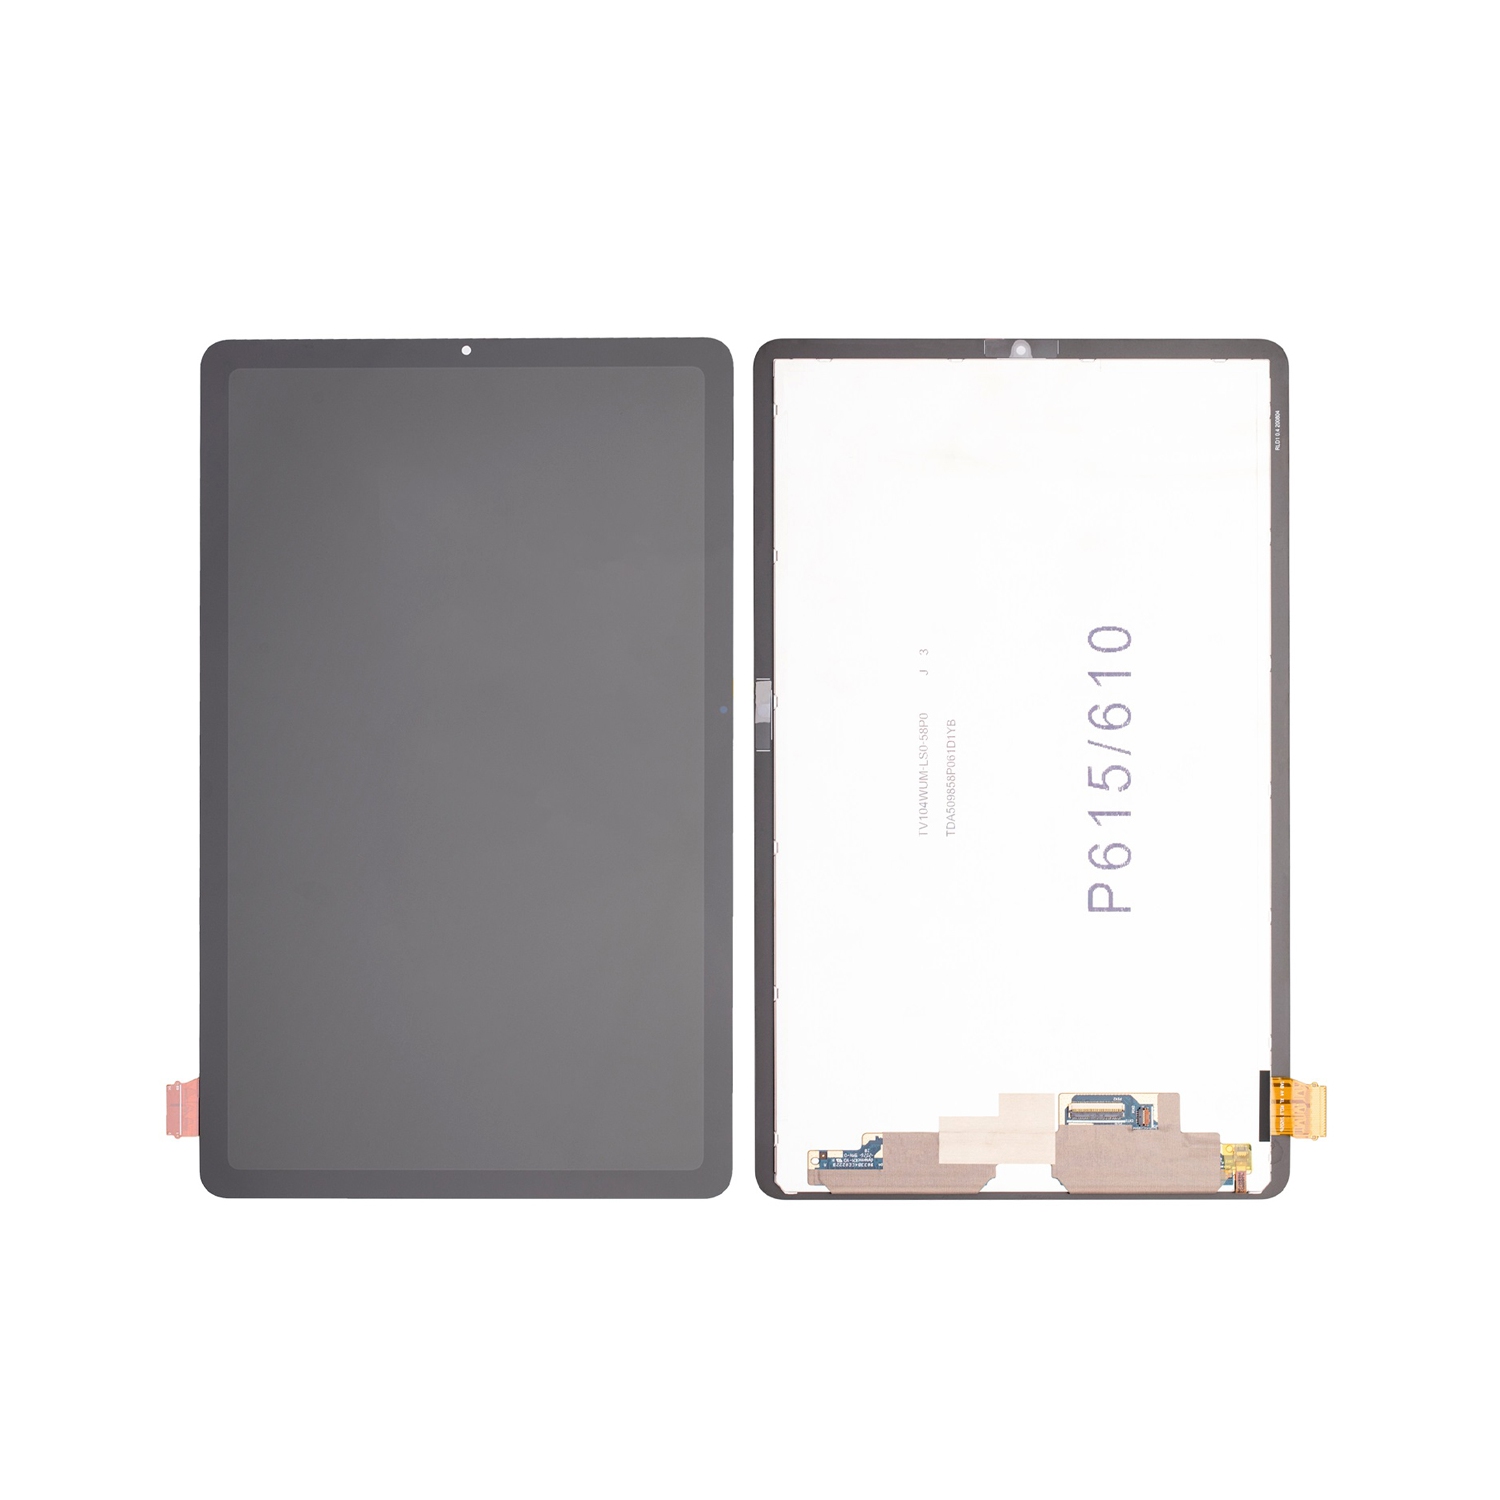 Replacement LCD Display Touch Screen Digitizer Assembly For Samsung Galaxy Tab S6 Lite 10.4 (2020) SM-P610 - Refurbished